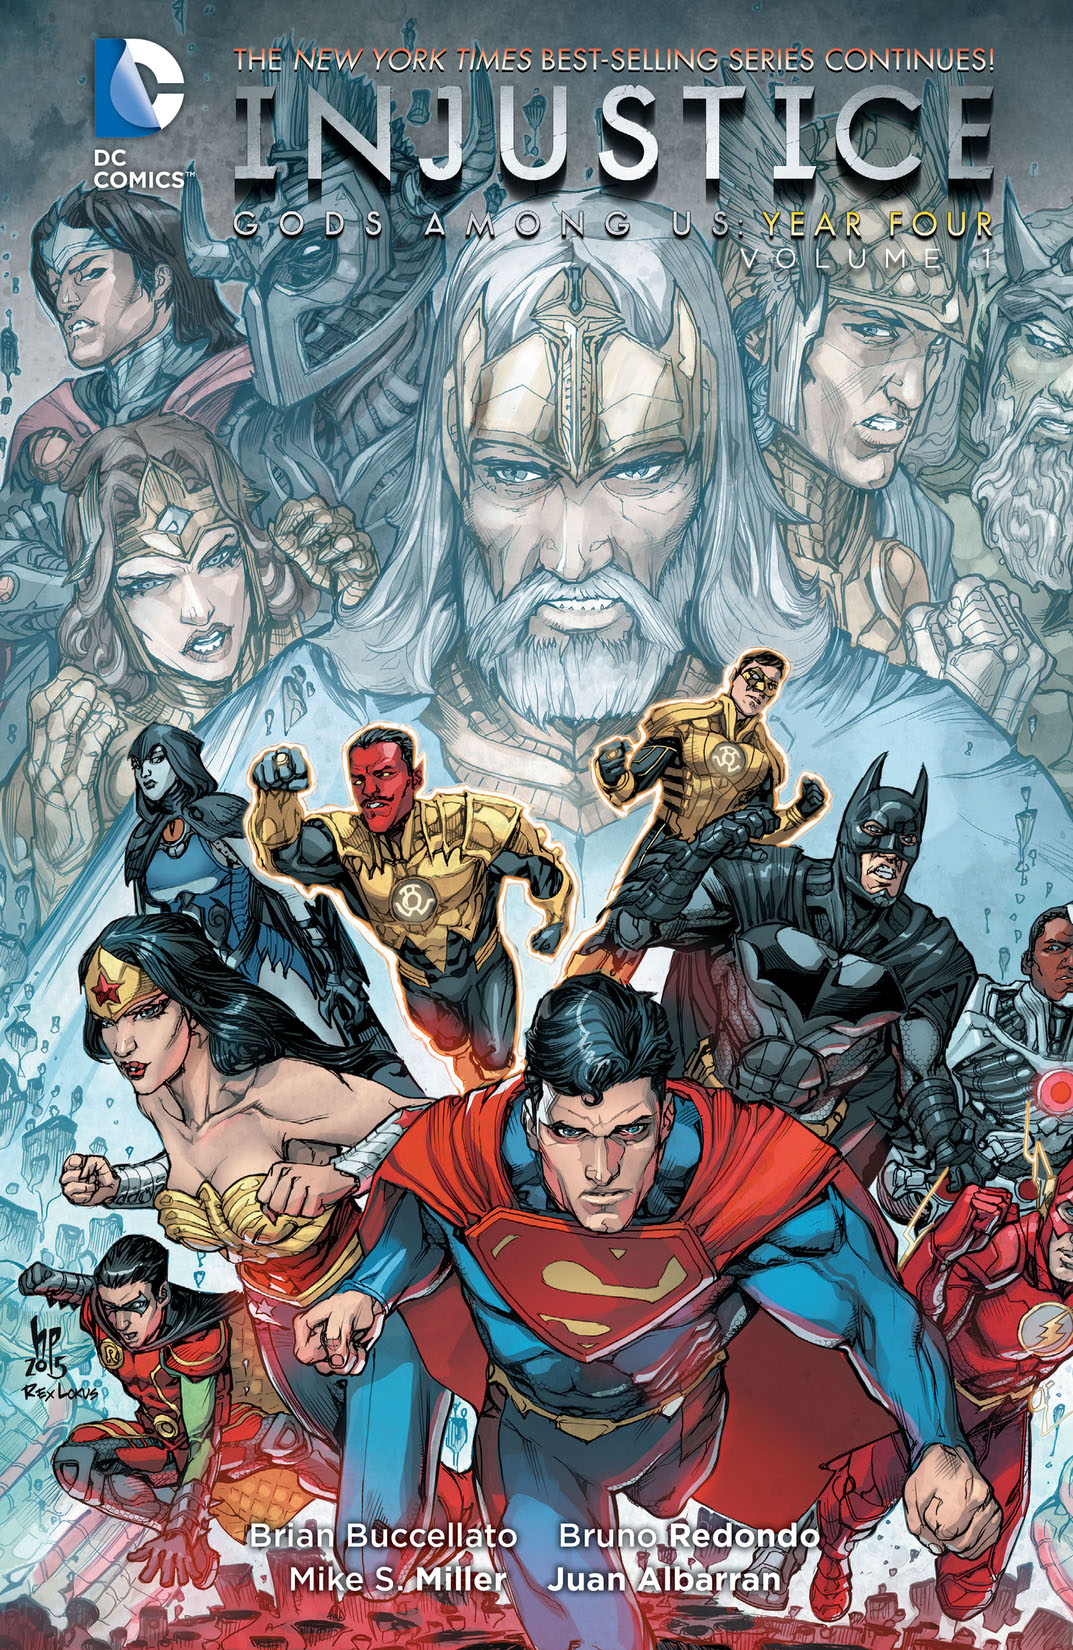 Injustice: Gods Among Us: Year Four Vol. 1 preview images